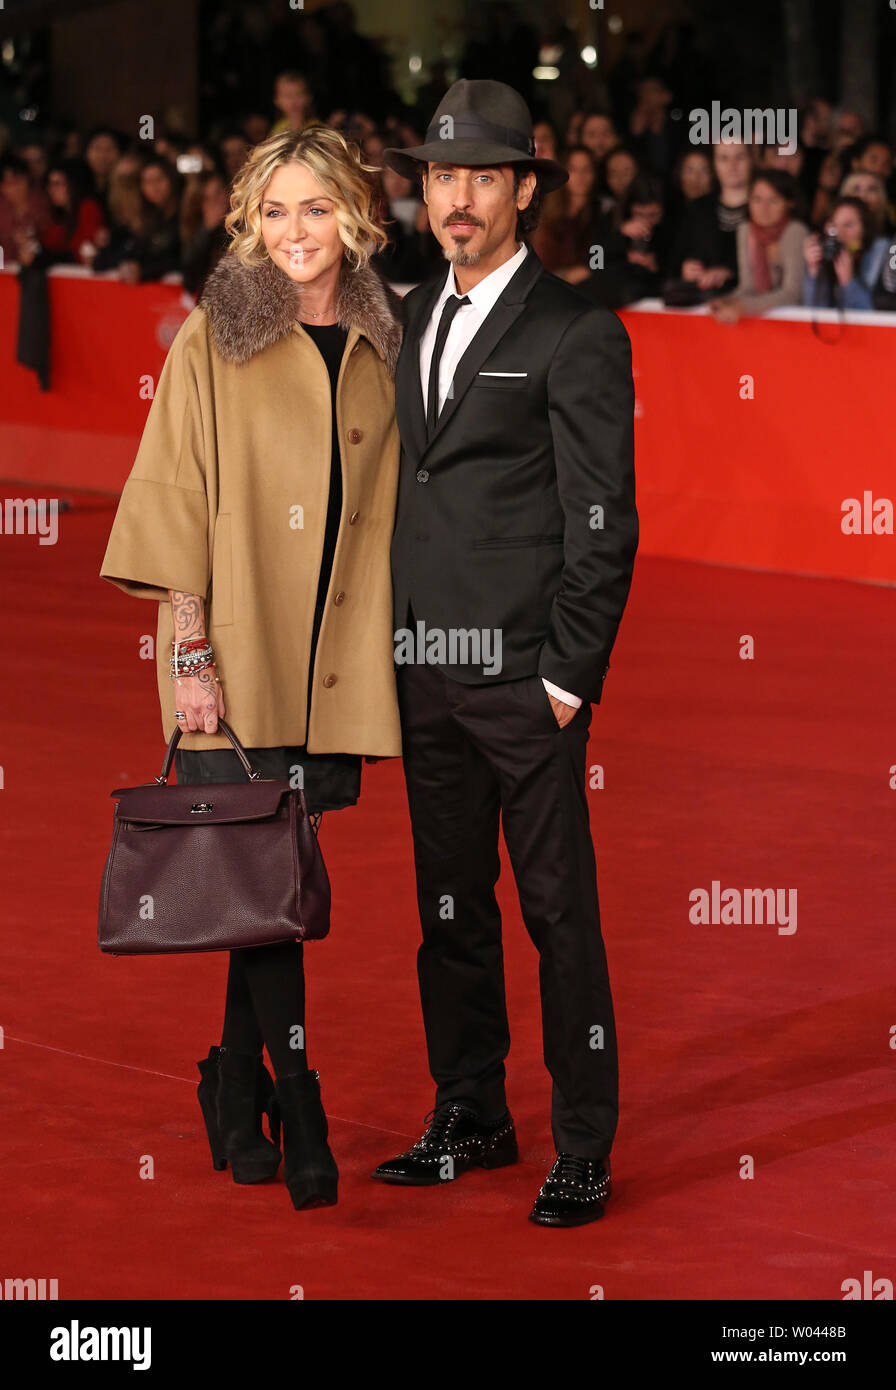 Paola Barale (L) and Raz Degan arrive on the red carpet before the screening of the film 'Dallas Buyers Club' during the 8th annual Rome International Film Festival in Rome on November 9, 2013.   UPI/David Silpa Stock Photo